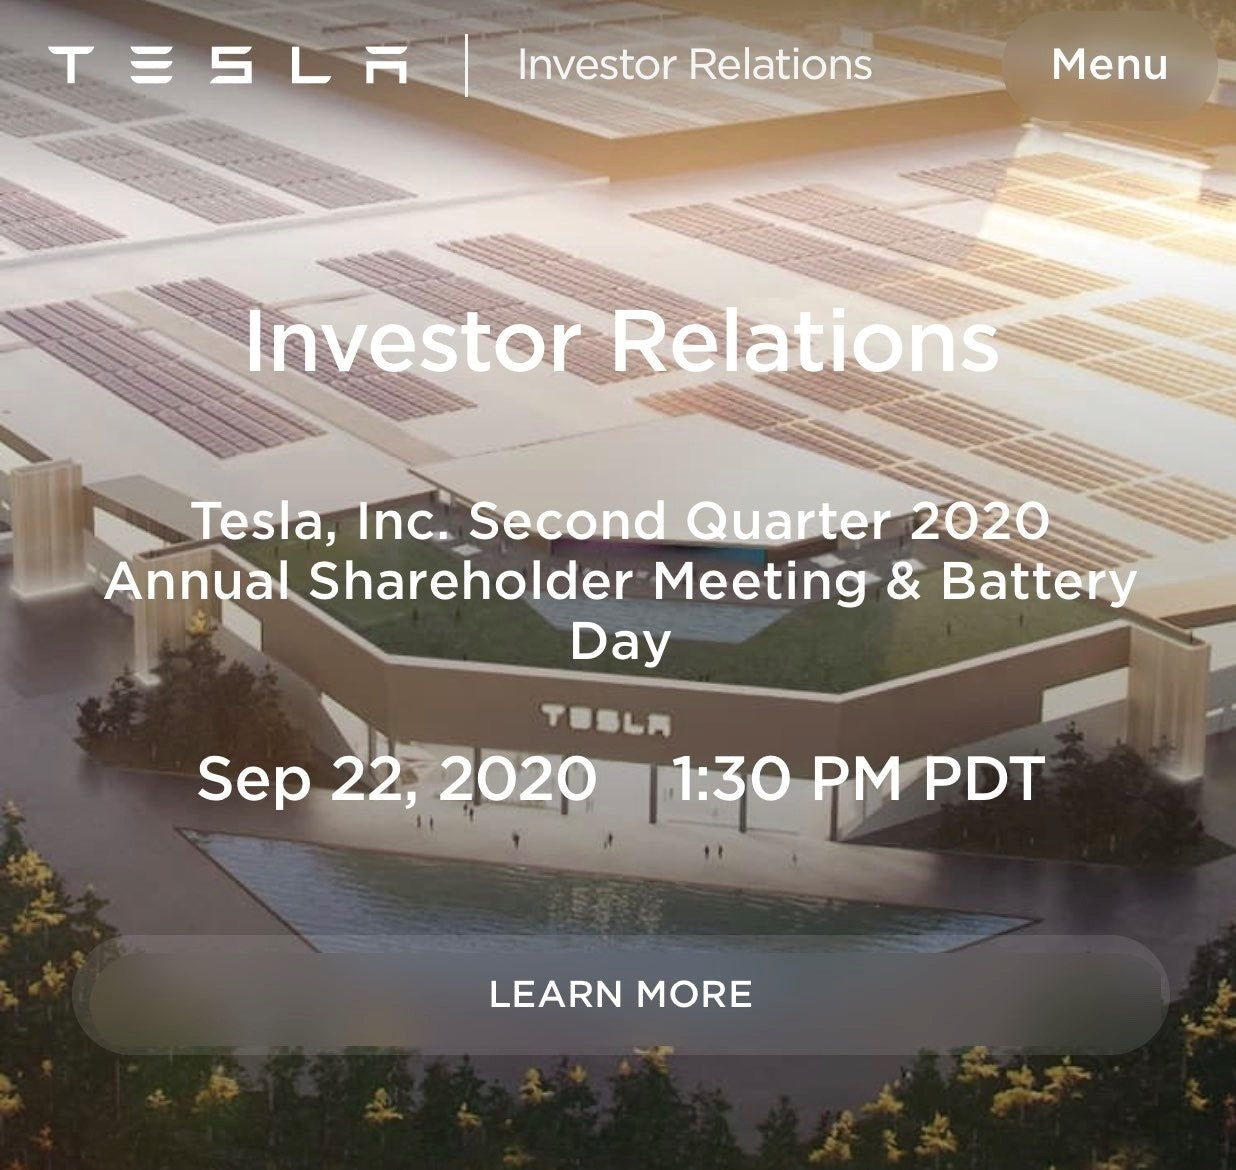 Tesla Battery Day Will Present the Key ‘To Accelerating the World’s Transition to Sustainable Energy’